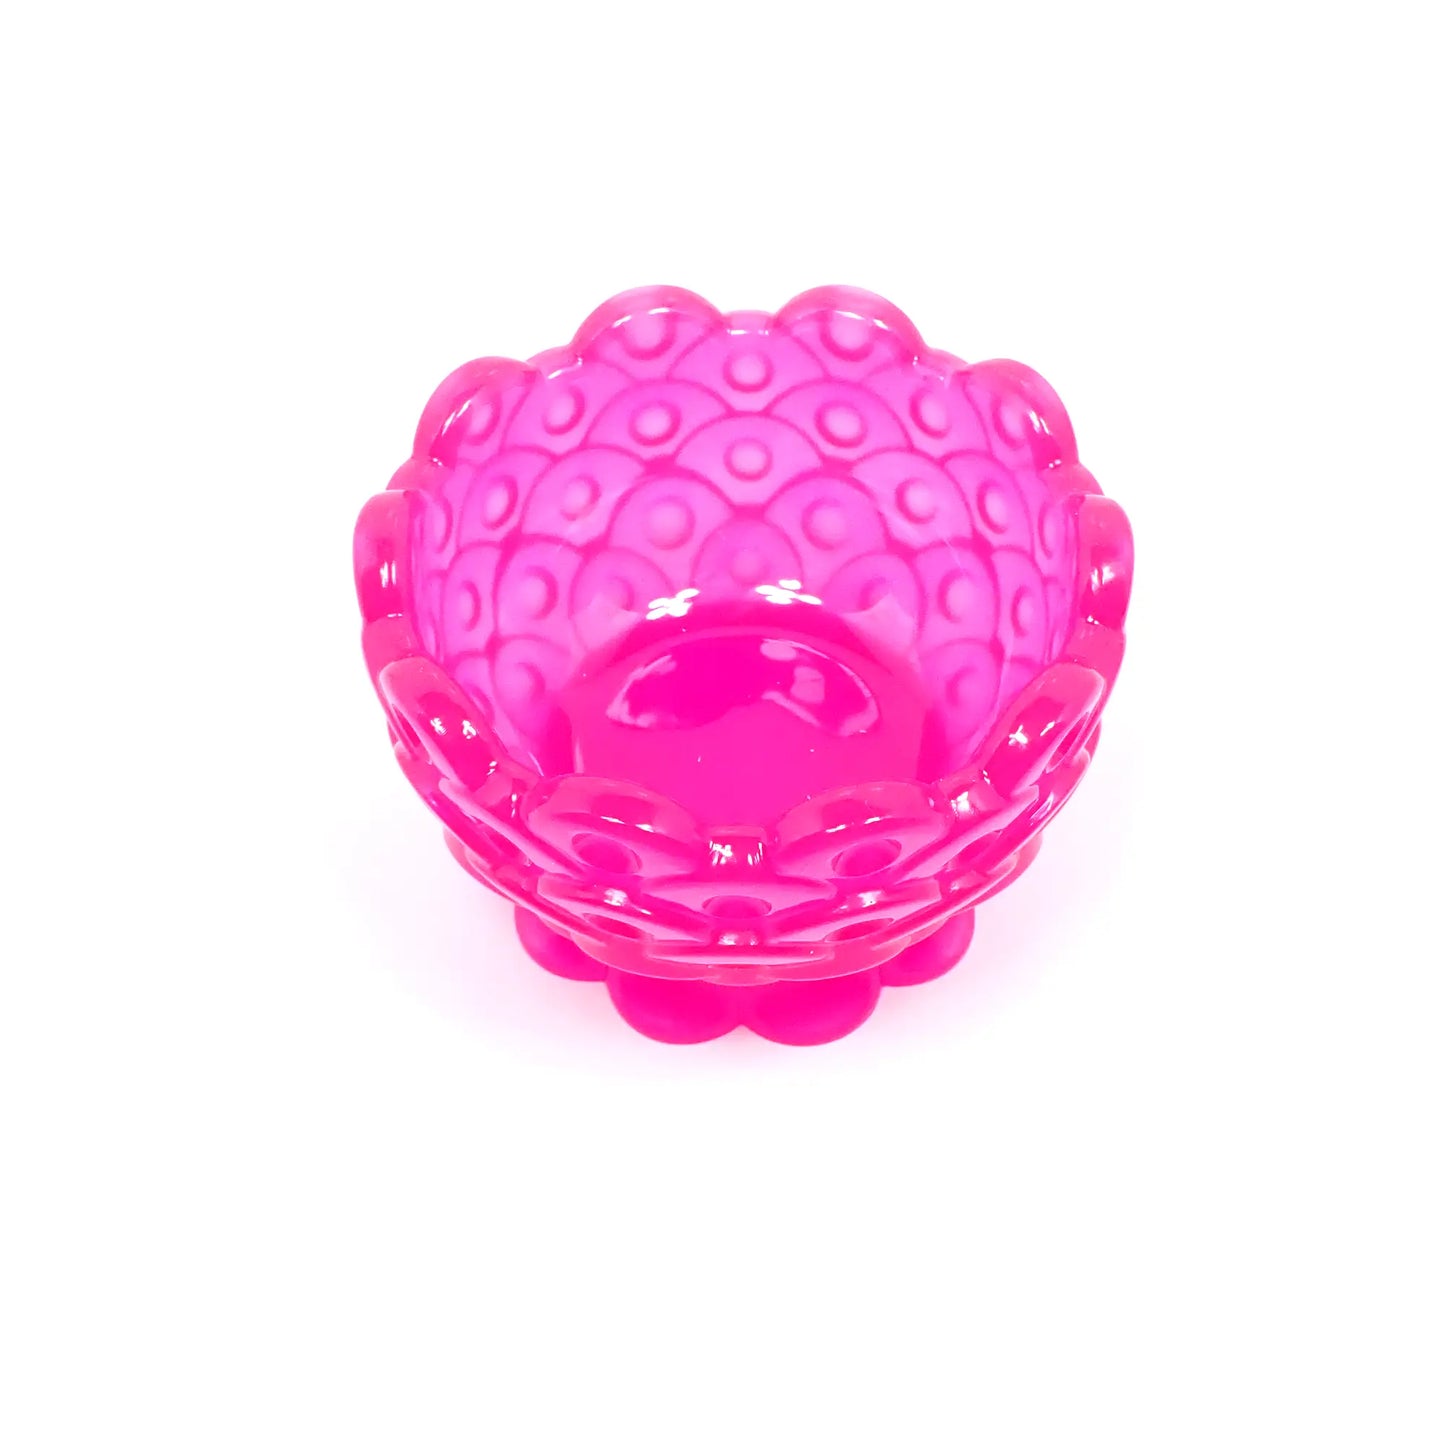 Small Handmade Neon Pink Resin Decorative Footed Bowl with Scalloped Edge and Indented Dot Pattern